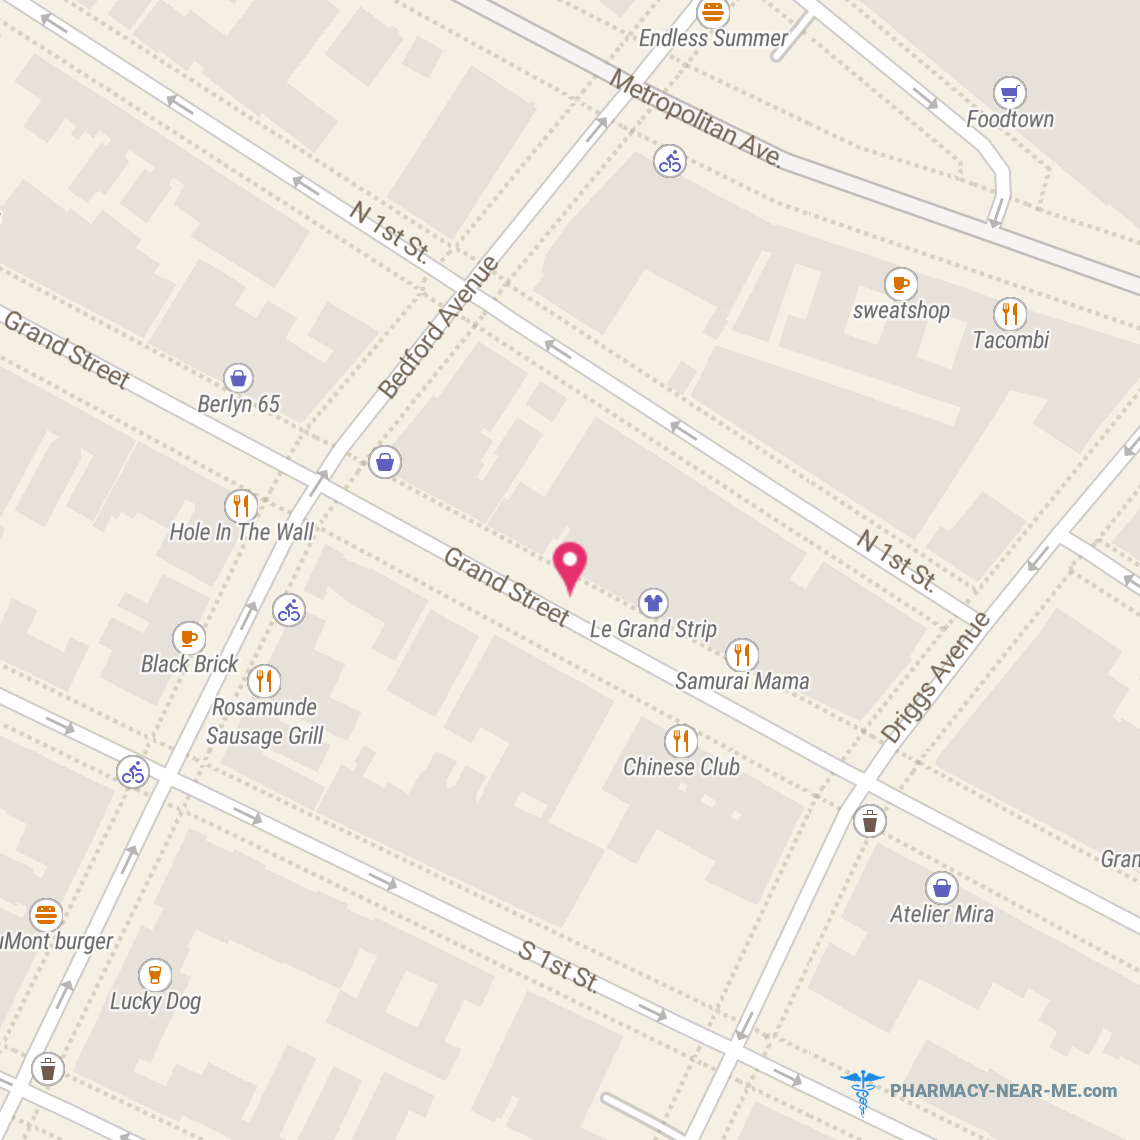 CHOPIN CHEMISTS - Pharmacy Hours, Phone, Reviews & Information: 189 Grand Street, Brooklyn, New York 11211, United States